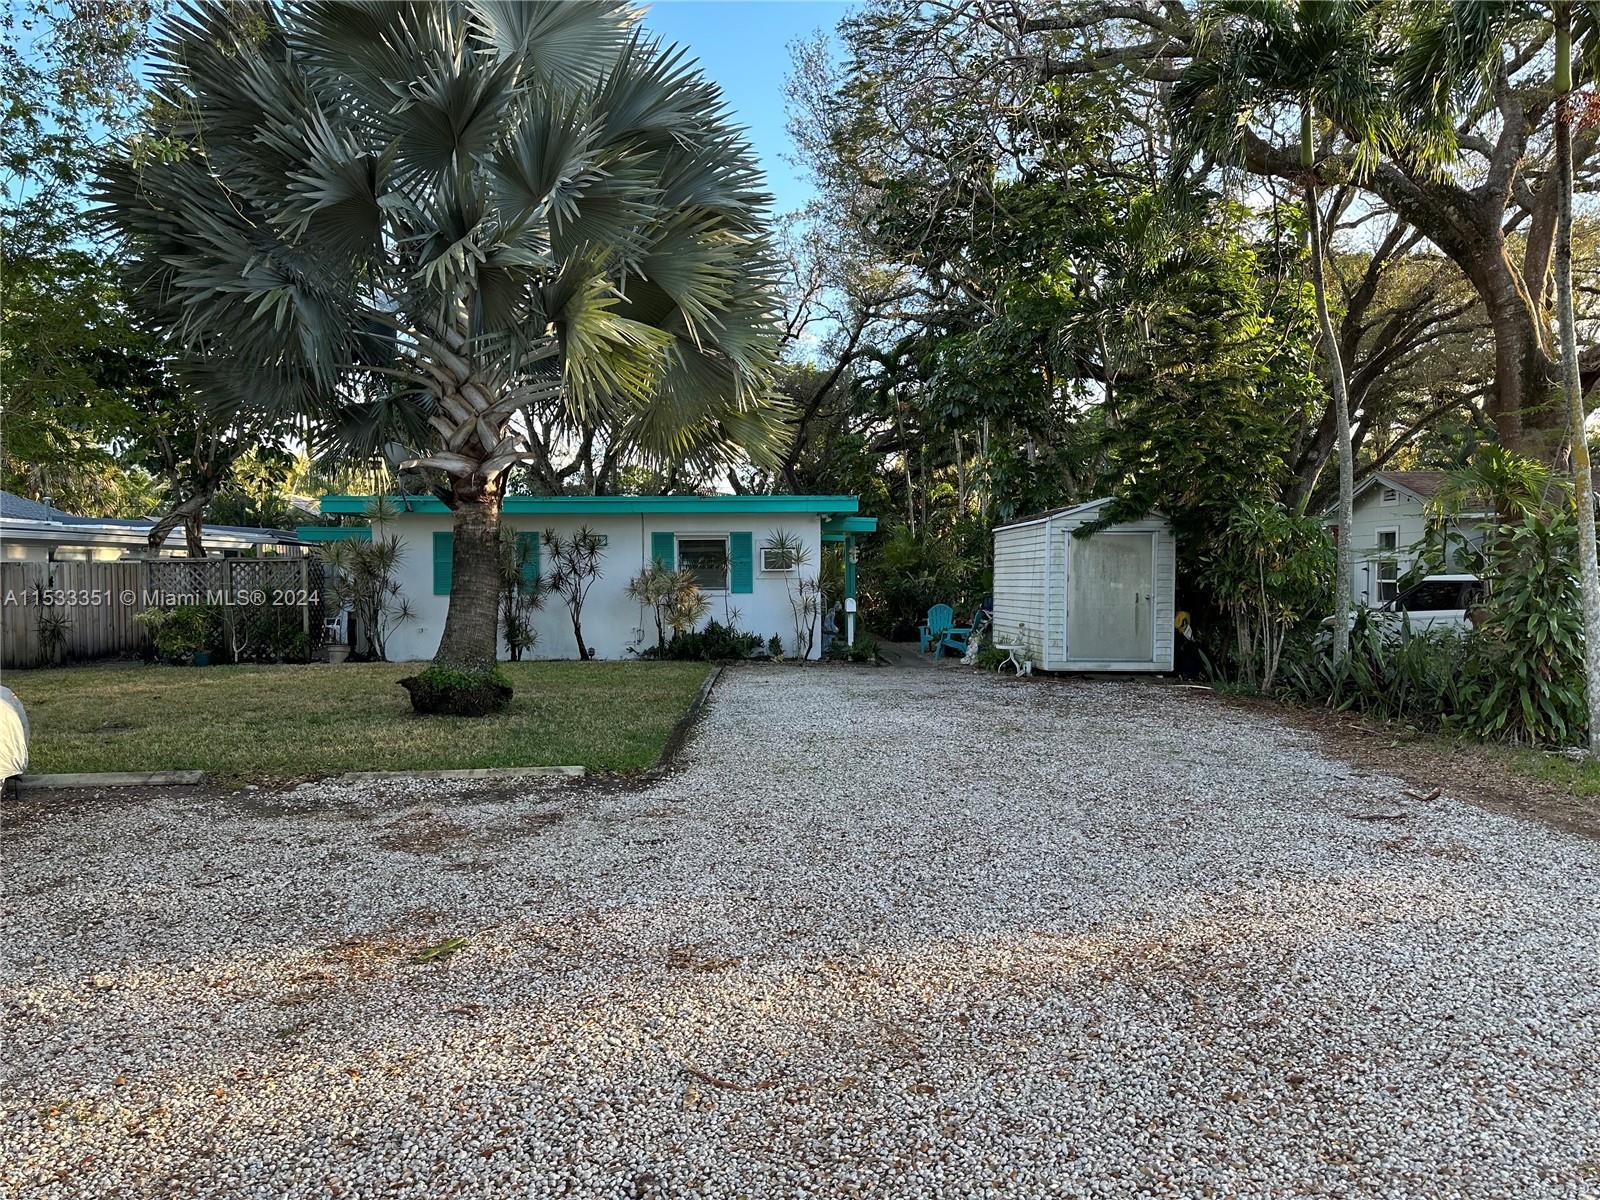 Photo of 600 SW 11th St in Fort Lauderdale, FL